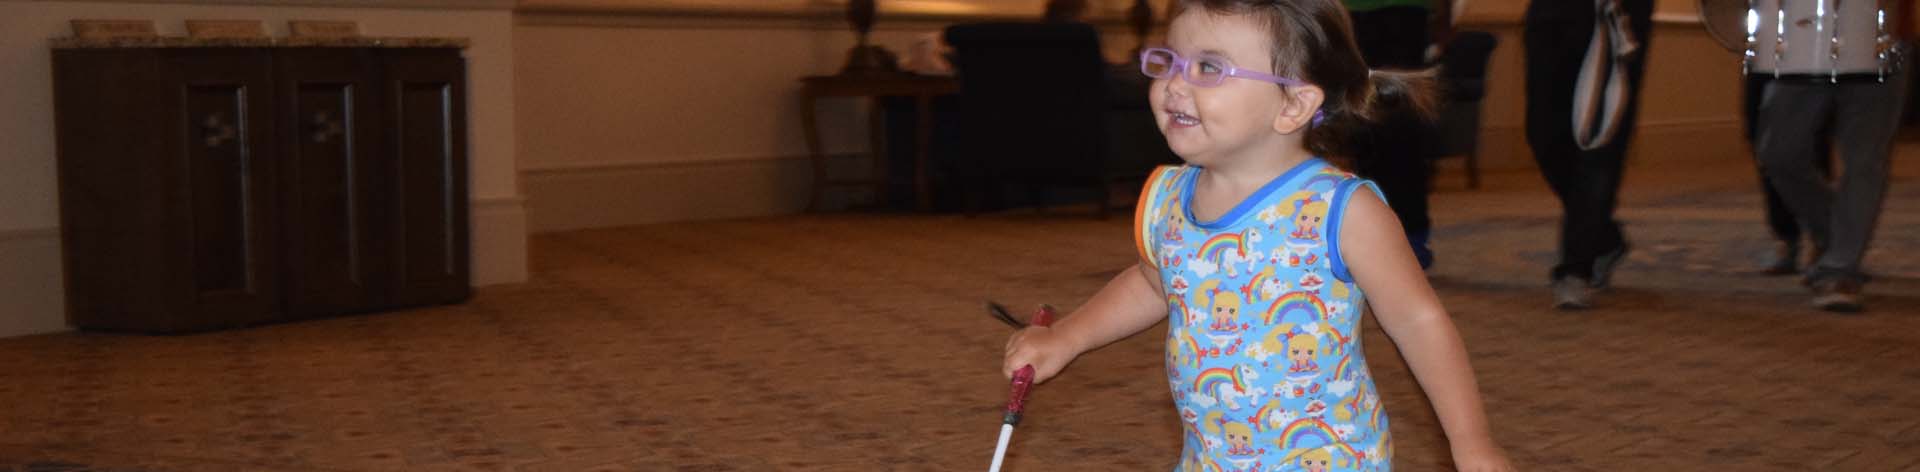 A blind child skips along with her cane in the lead.